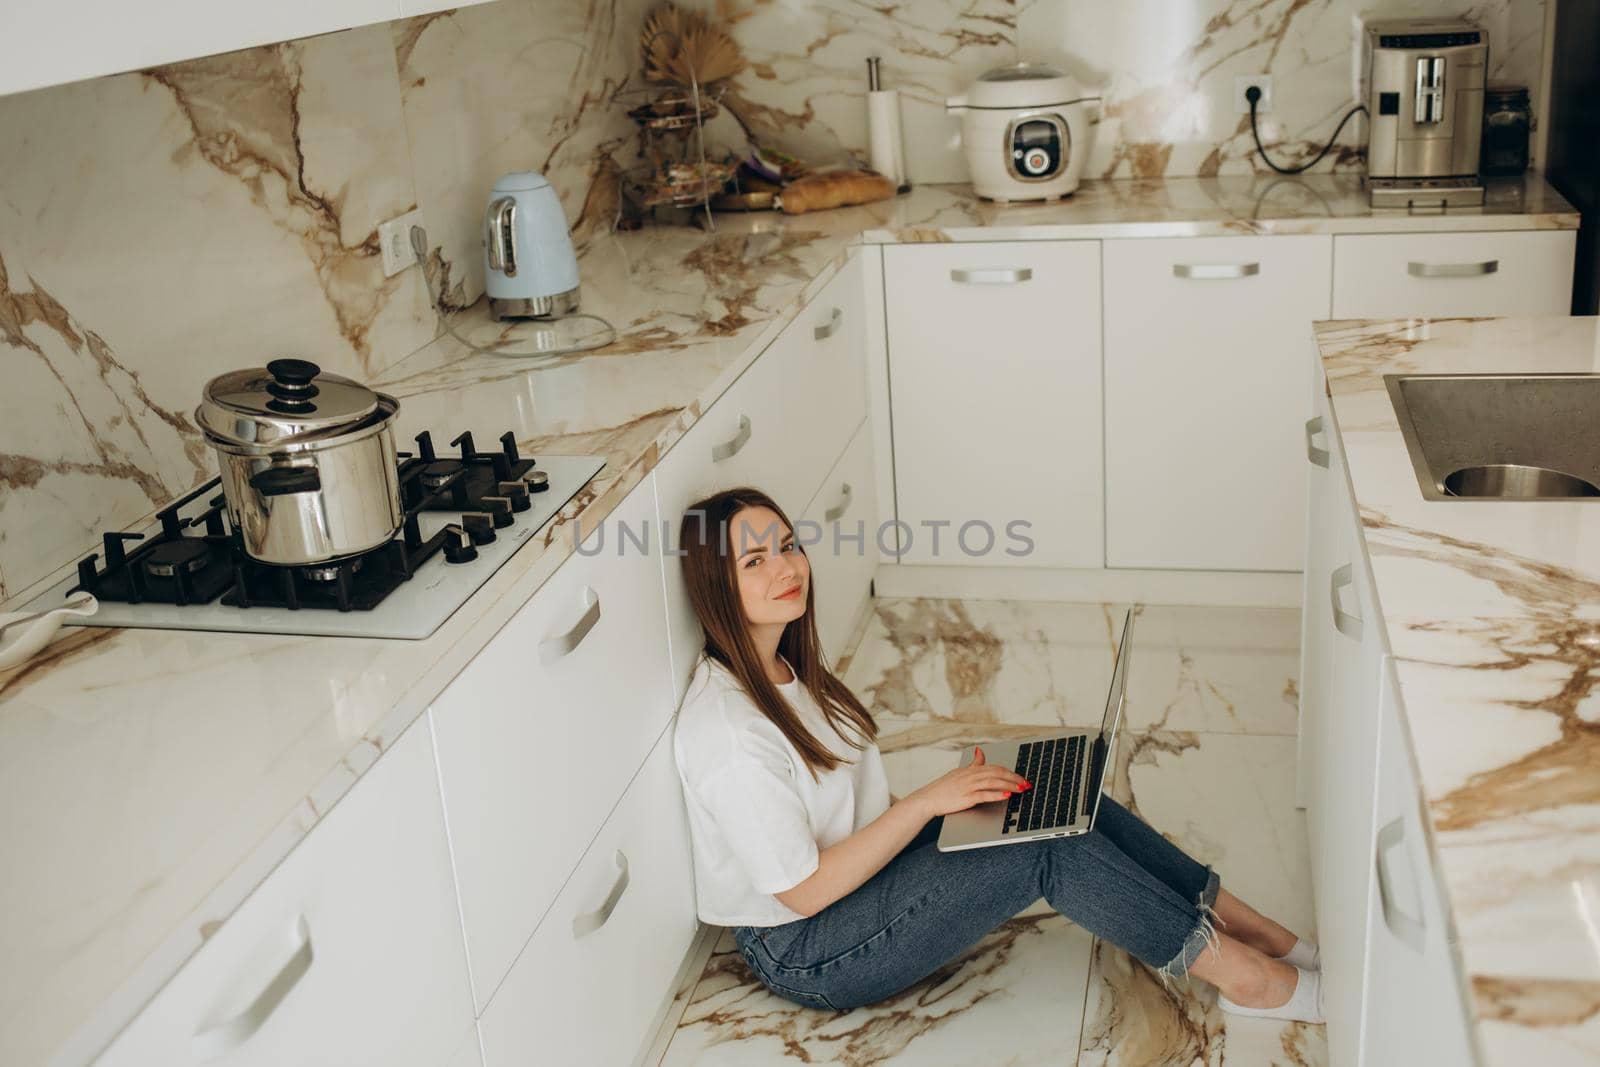 Beautiful woman working with laptop sitting on the floor in the kitchen by fentonroma